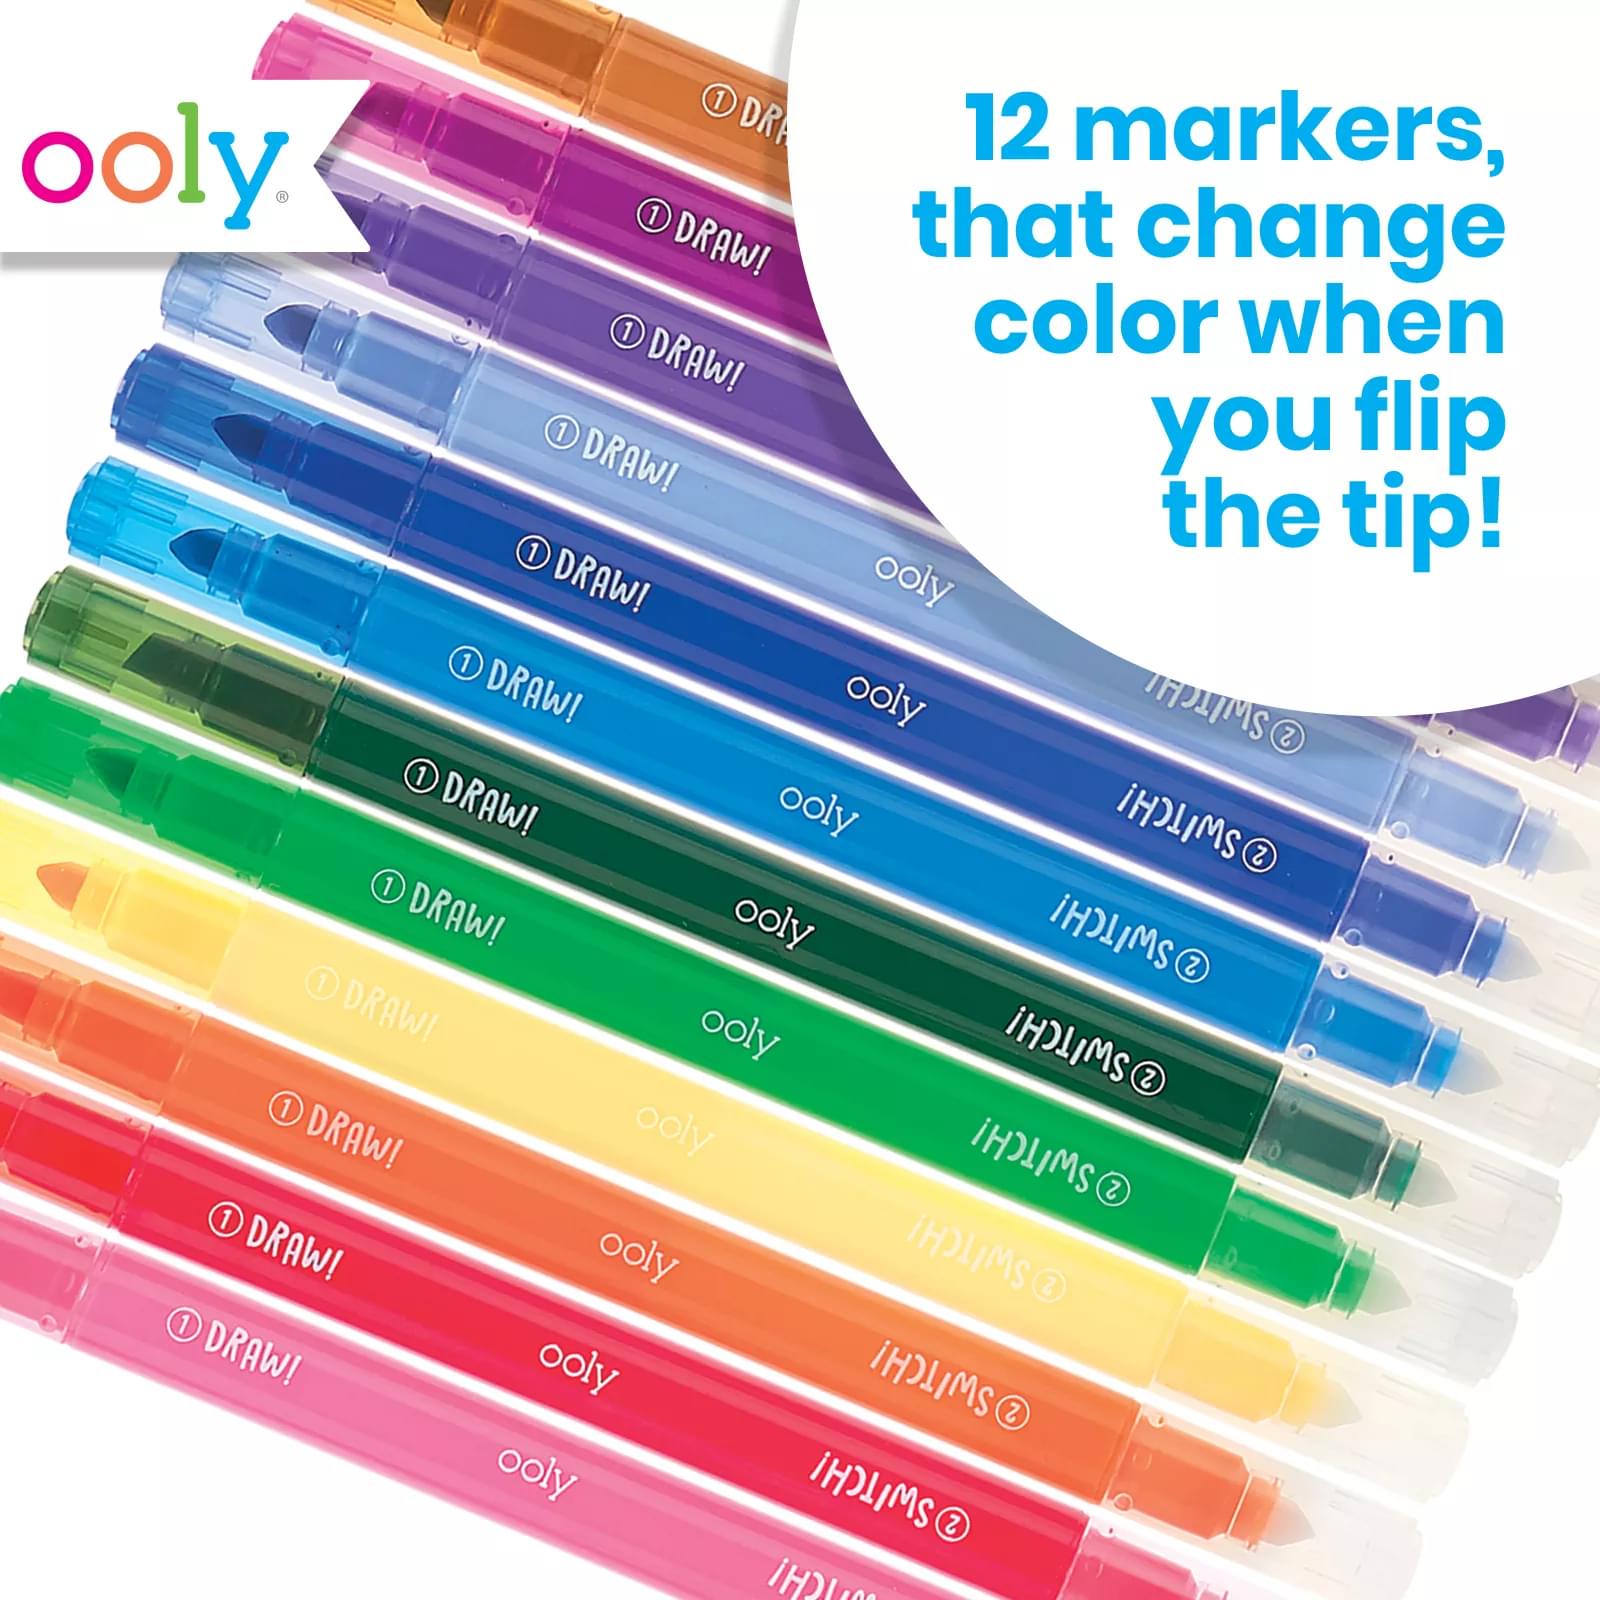 Ooly Color Changing Markers